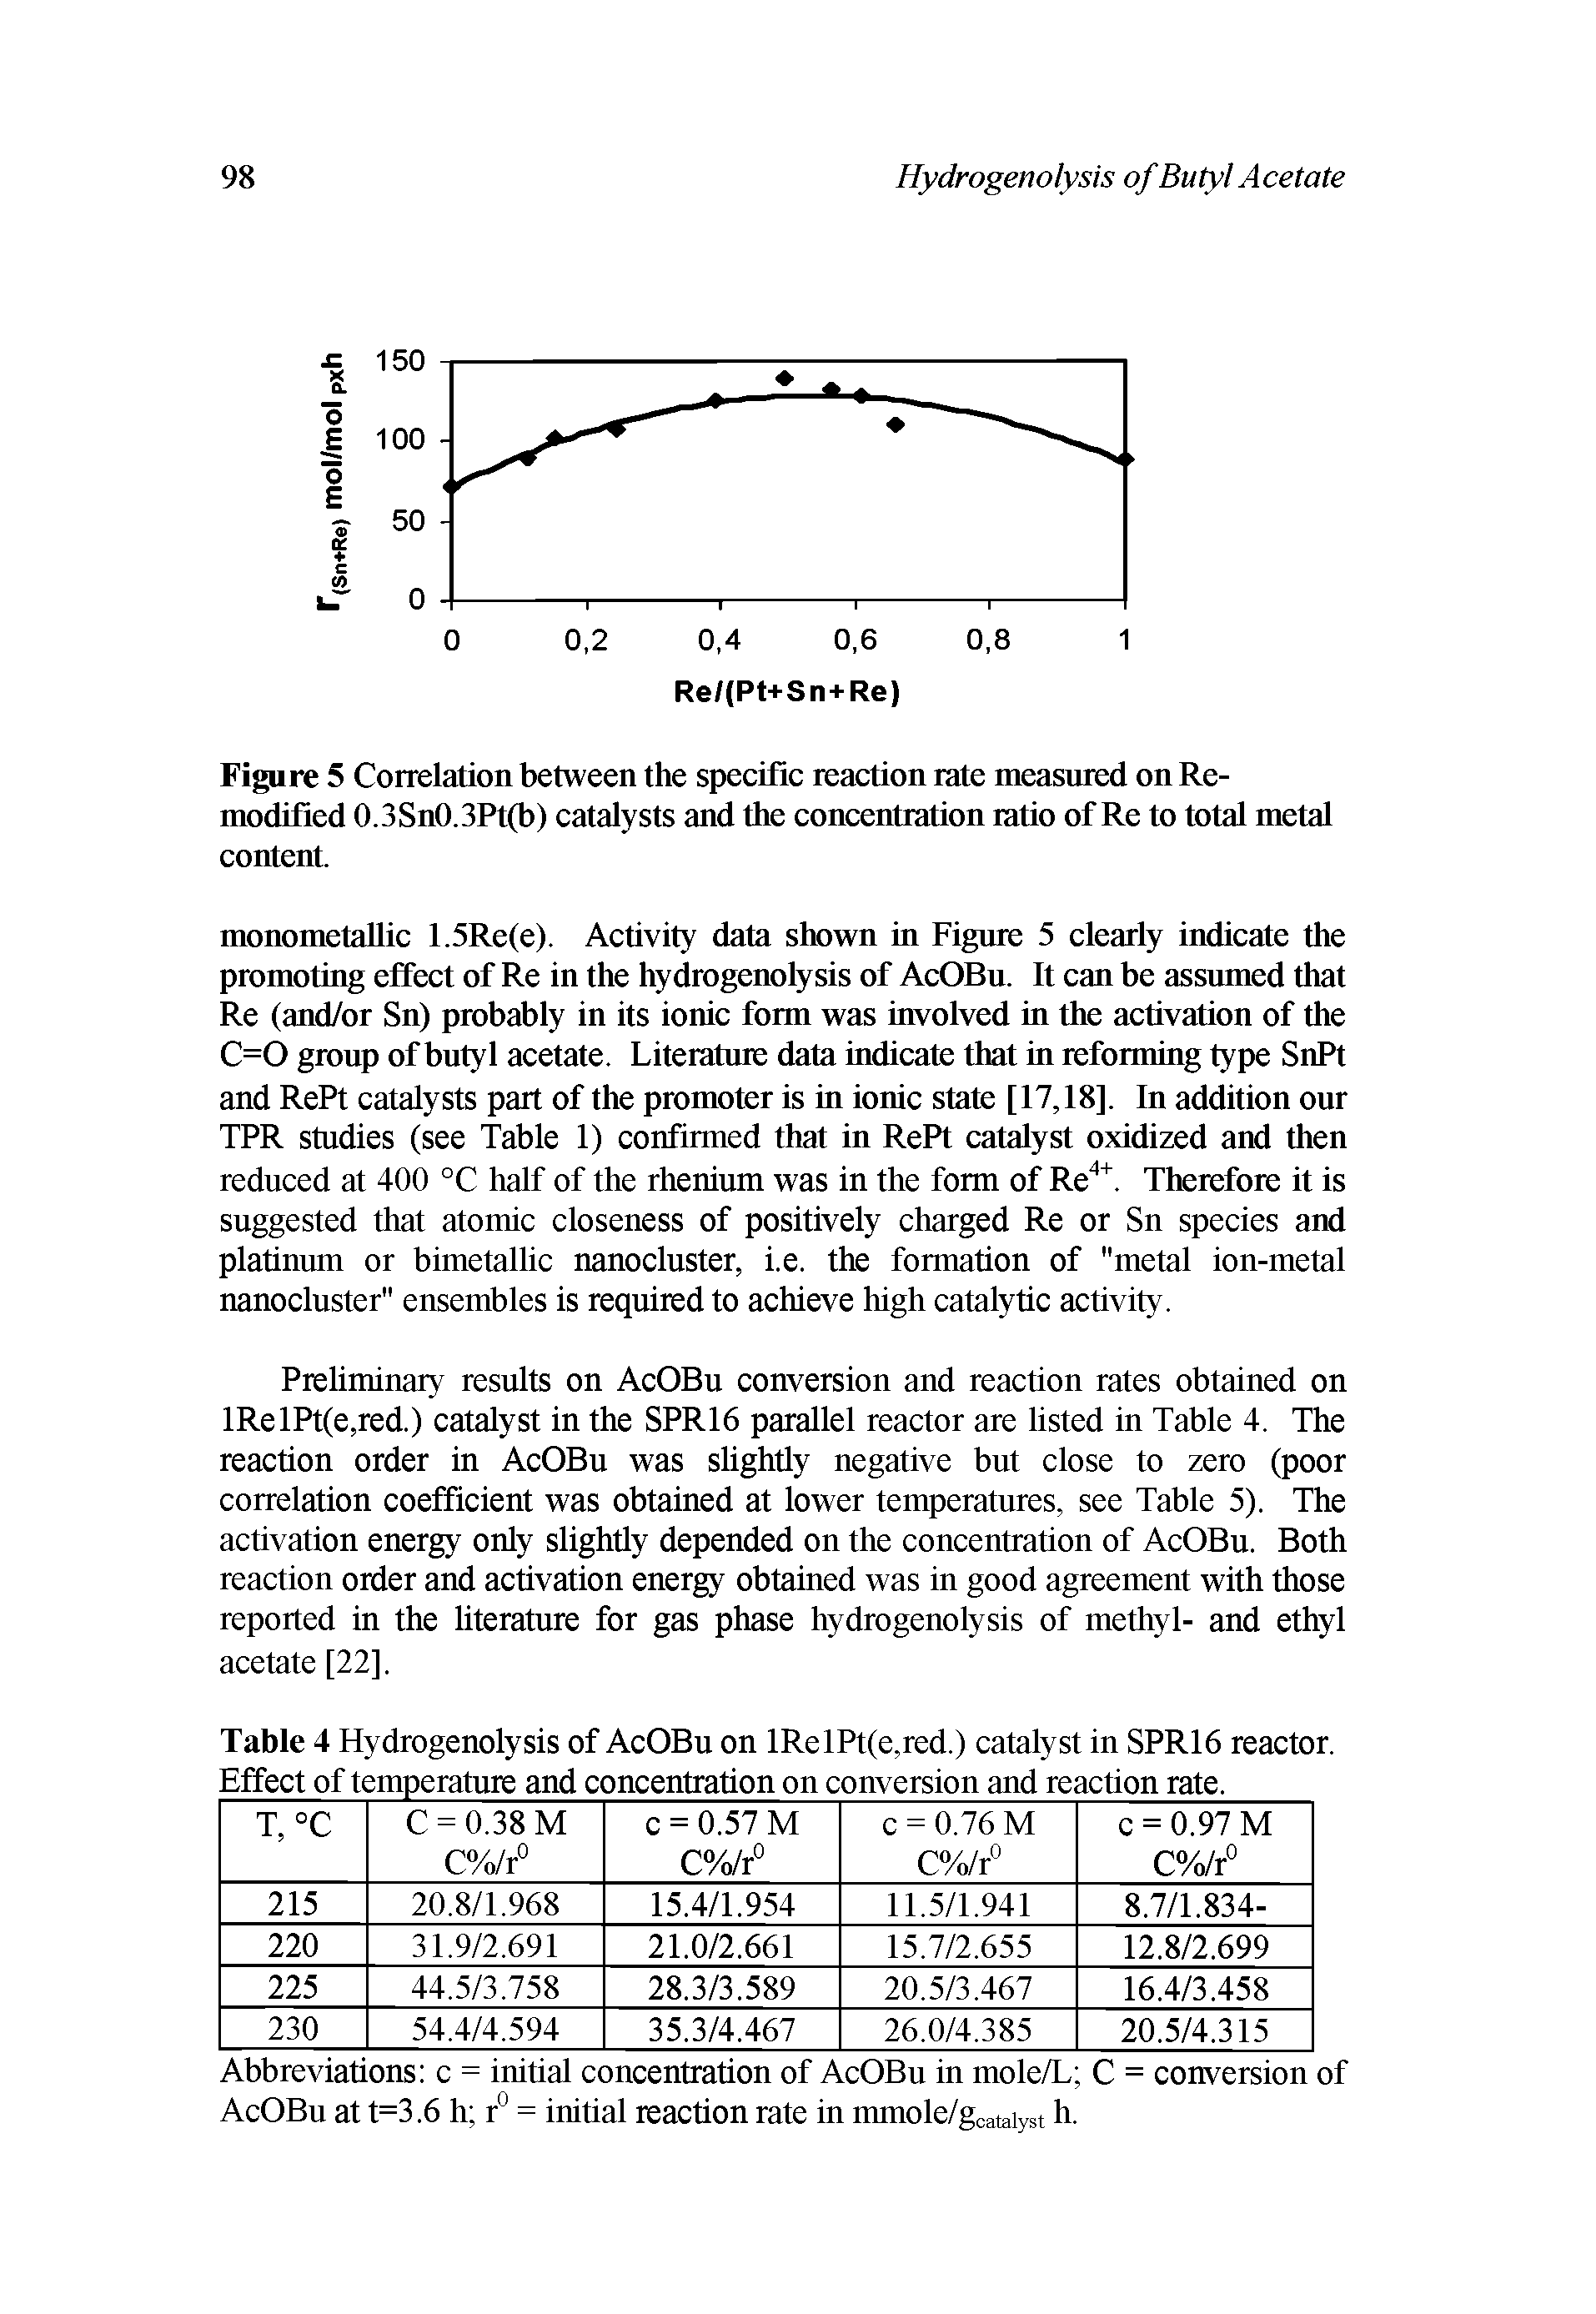 Table 4 Hydrogenolysis of AcOBu on lRelPt(e,red.) catalyst in SPR16 reactor. Effect of temperature and concentration on conversion and reaction rate.